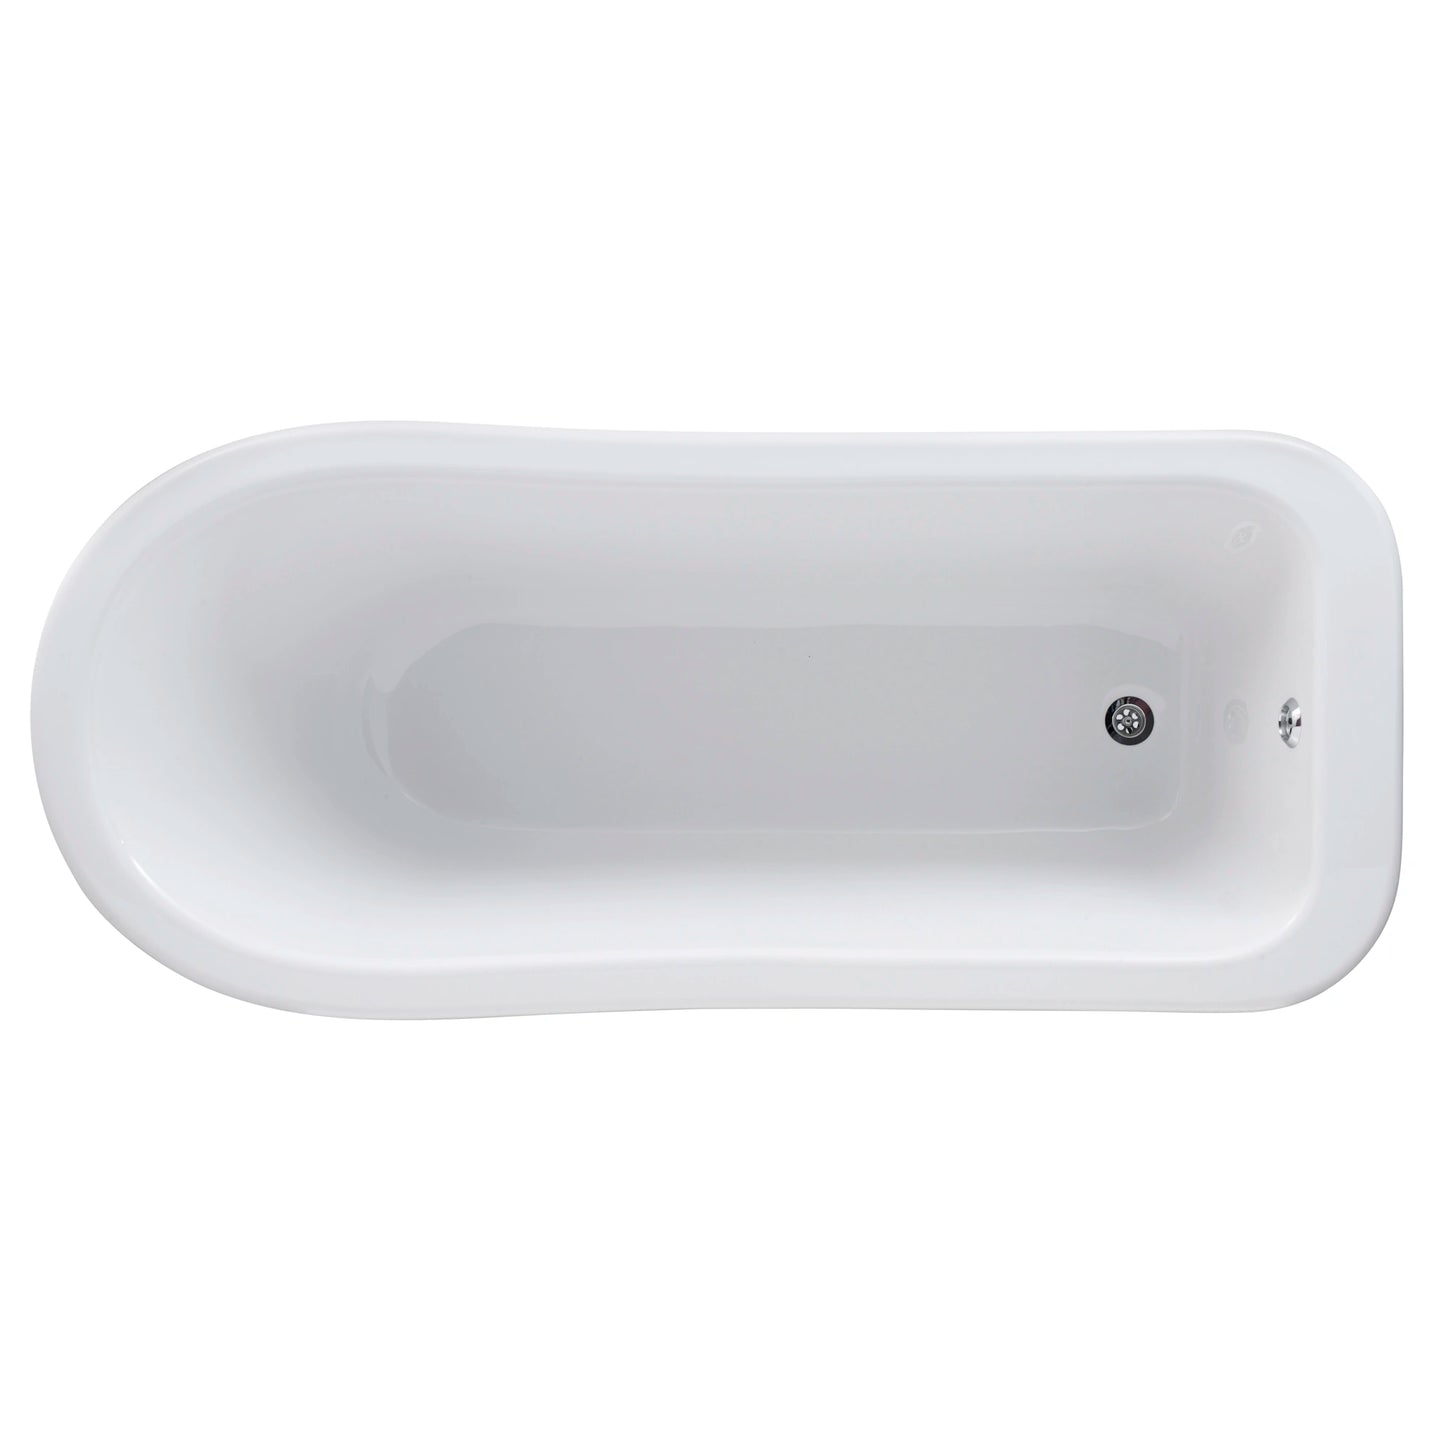 Hudson Reed Brockley Single Ended Acrylic Freestanding Bath with Legs